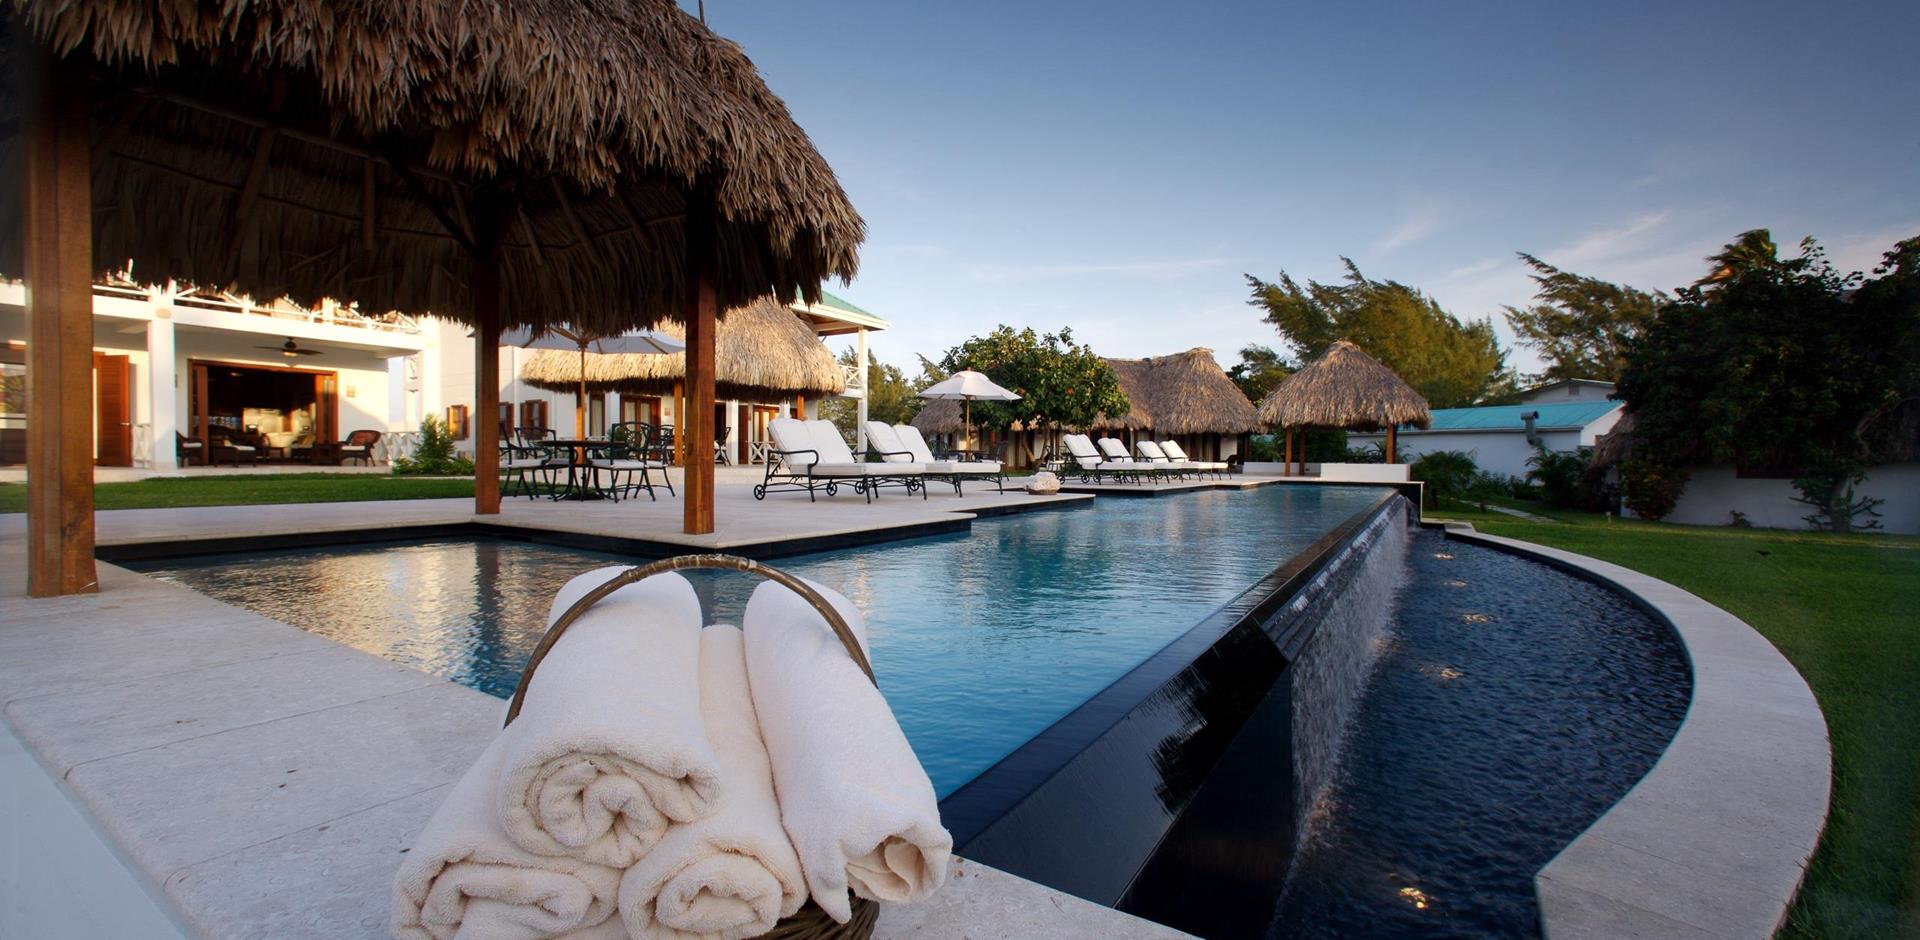 Outdoor seating area and pool, Victoria House Resort & Spa, The Cayes, Belize, Central America